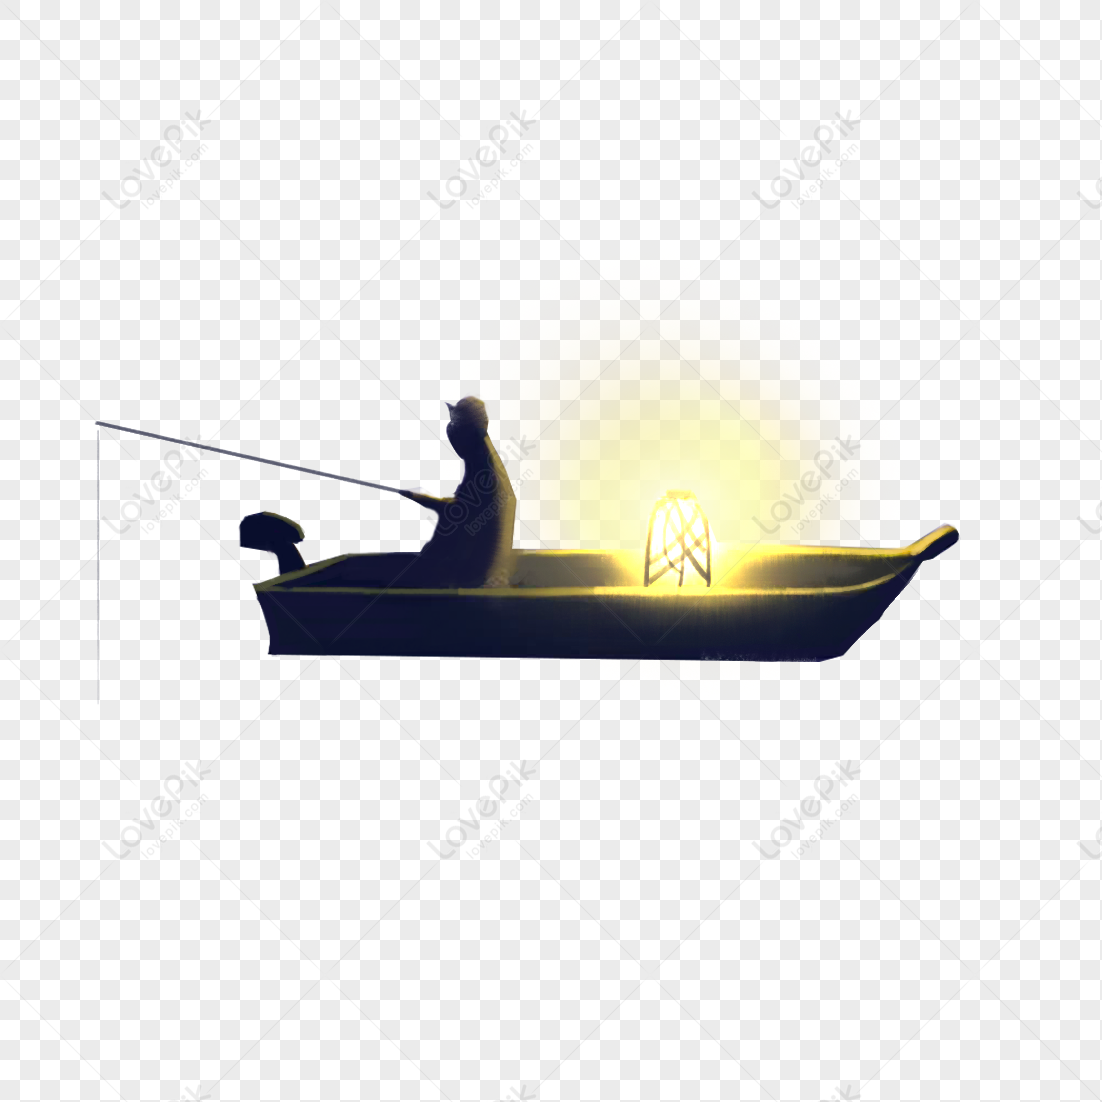 boat, boat fishing, boat silhouette, black boat png white transparent